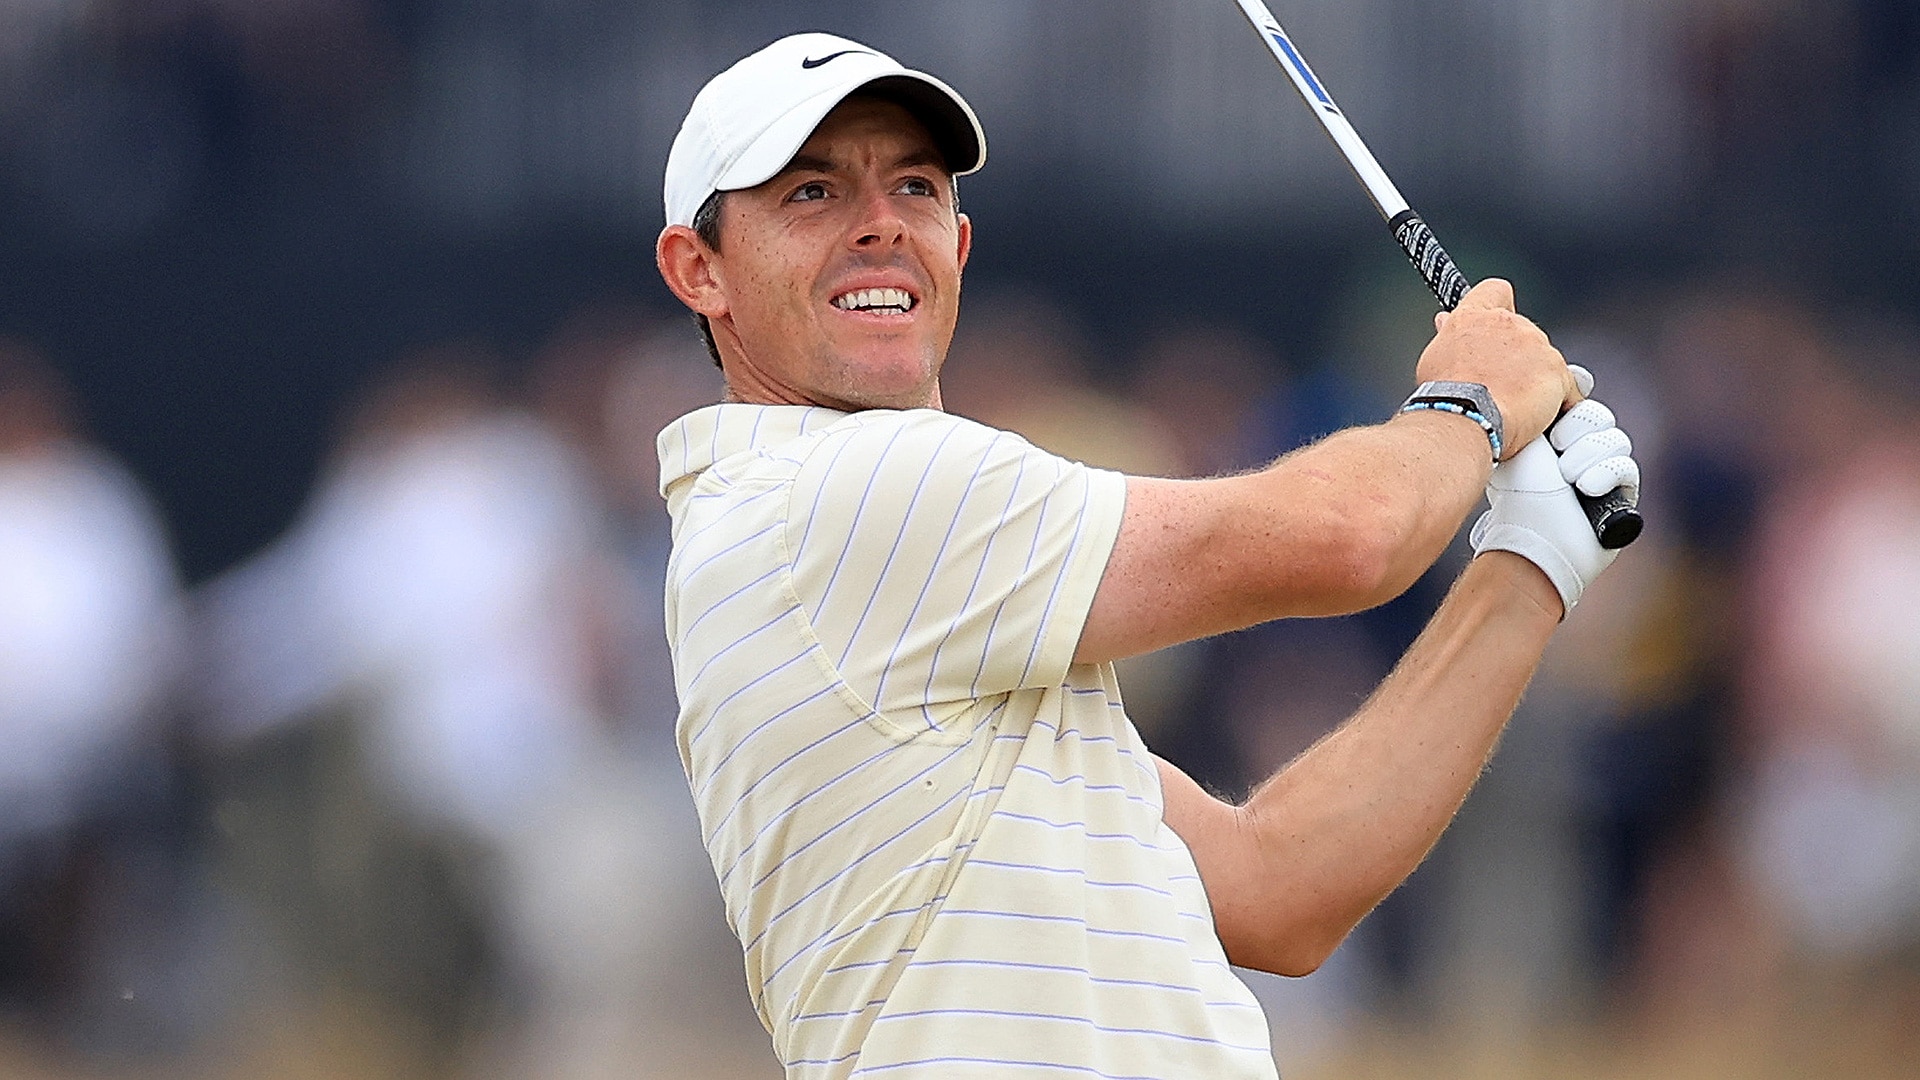 FedEx St. Jude odds: Rory McIlroy favored to win playoff opener